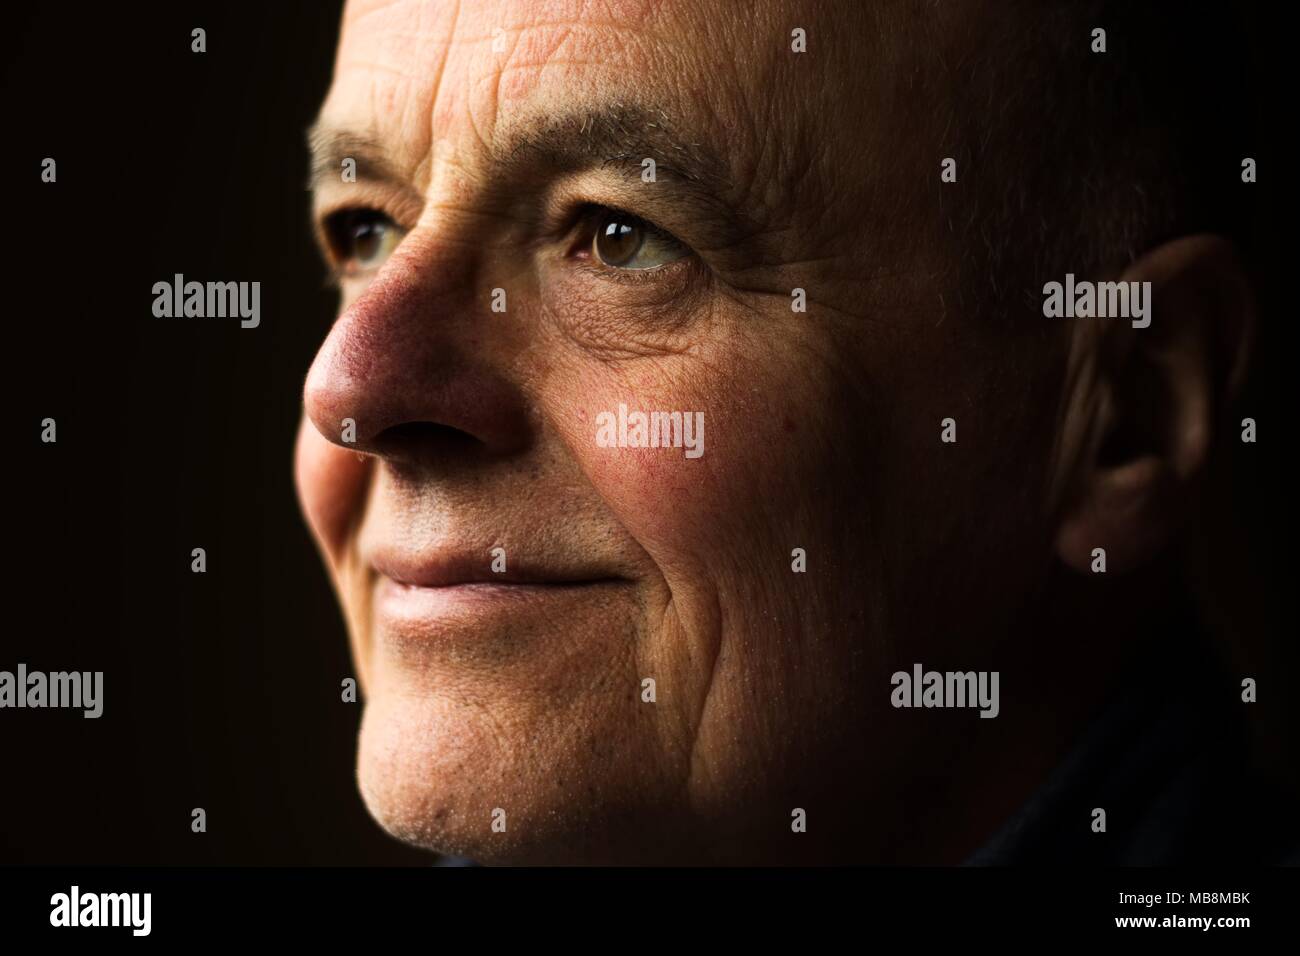 Close-up portrait of an older man smiling. Stock Photo